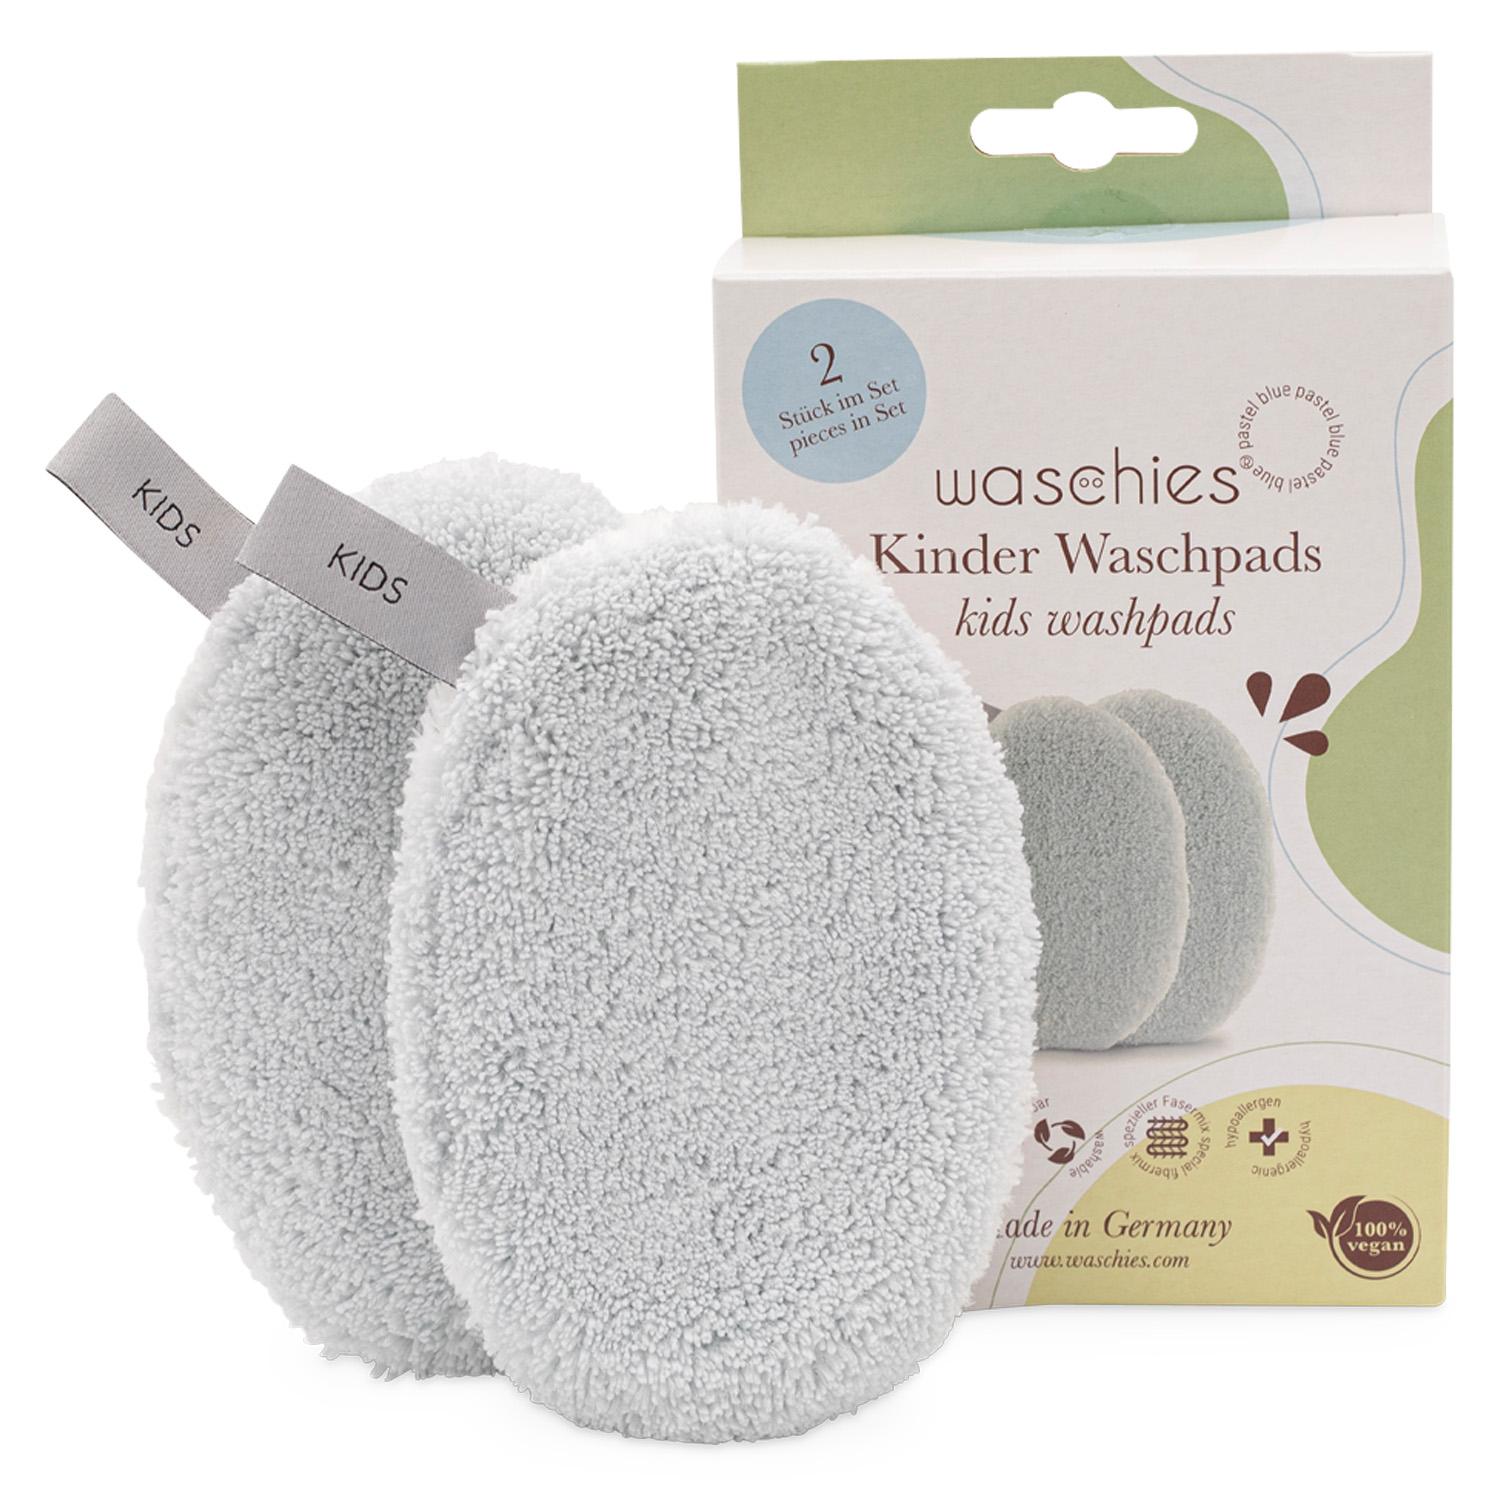 Waschies Kidsline - wash pads for babies and kids pastel blue